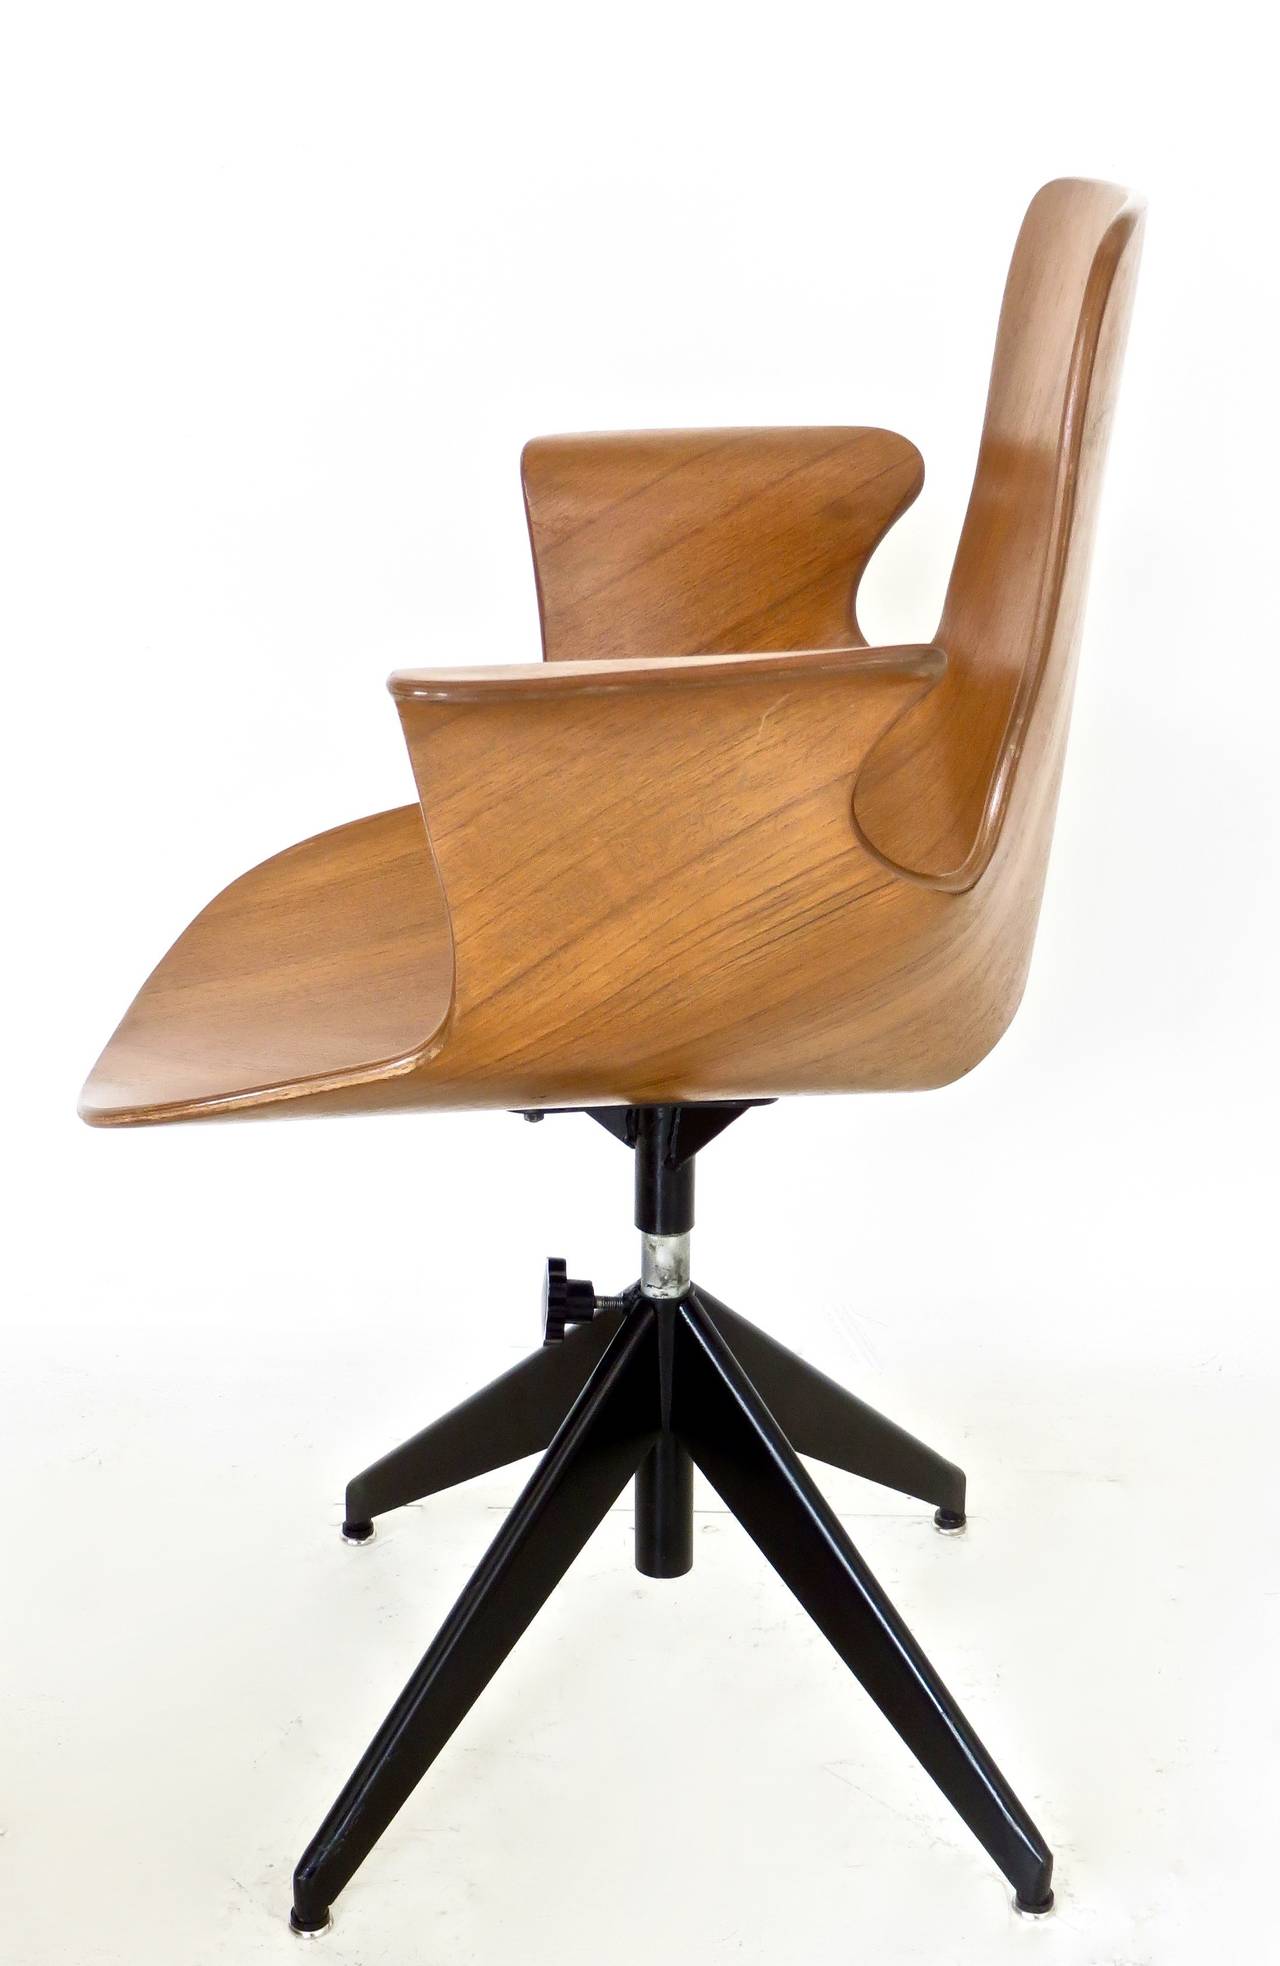 The Medea desk chair by Vittorio Nobili for Tagliabue. 
Elegant molded walnut wood seat on a black enamel swivel base.
4 brass caps on seat. Matte finish on the wood. No chips or restorations. 
The seat can be raised or lowered via the black knob